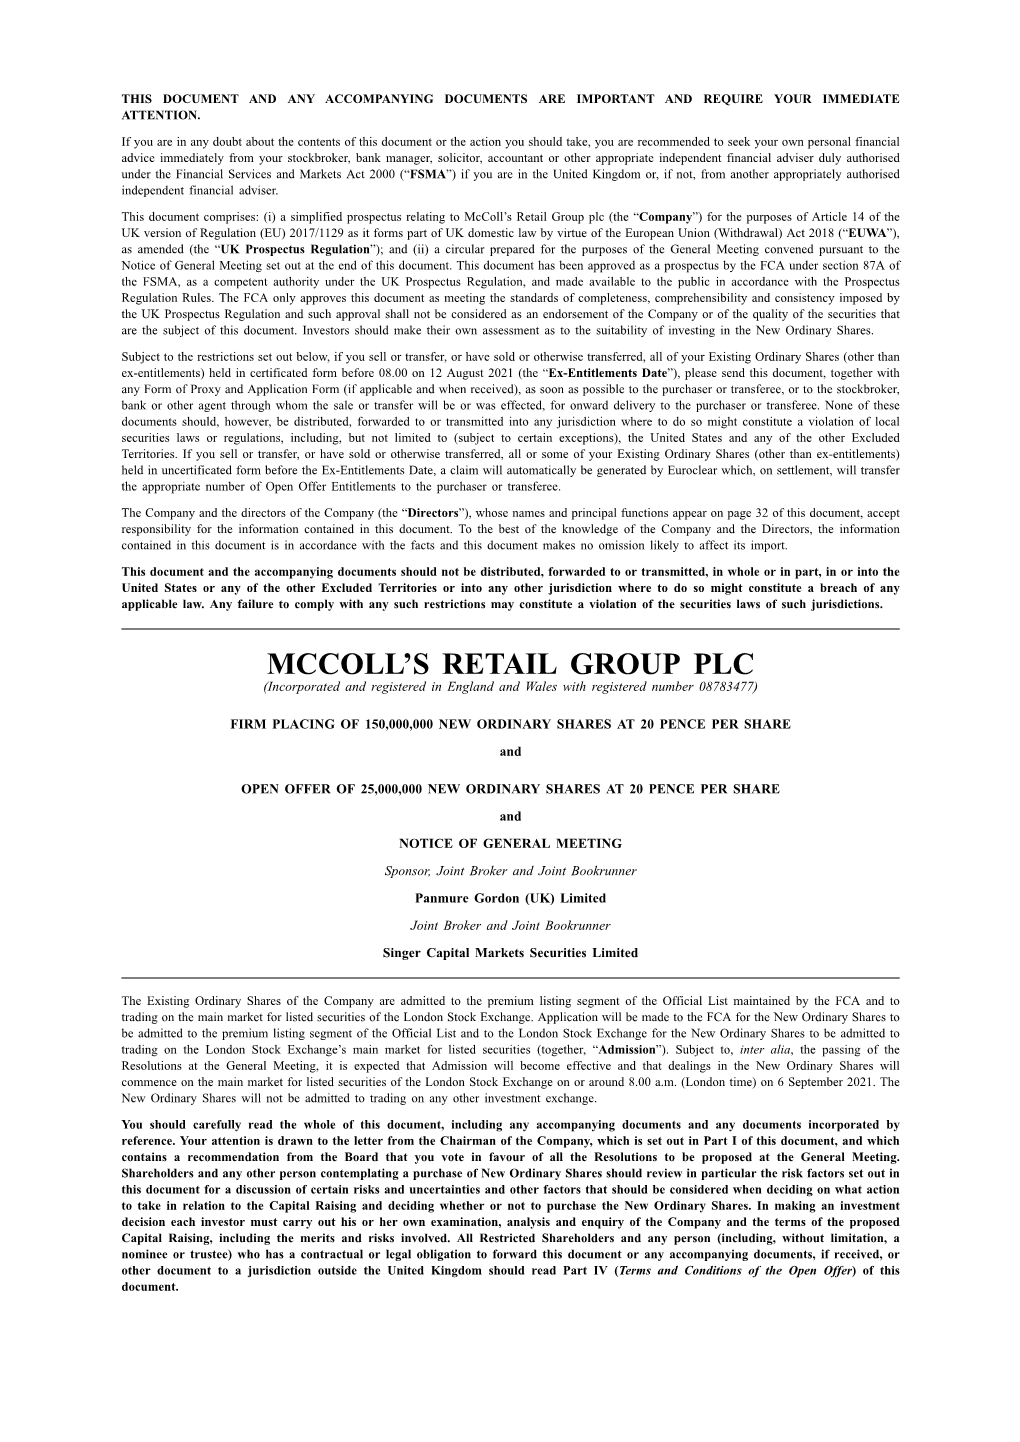 Mccoll's Retail Group